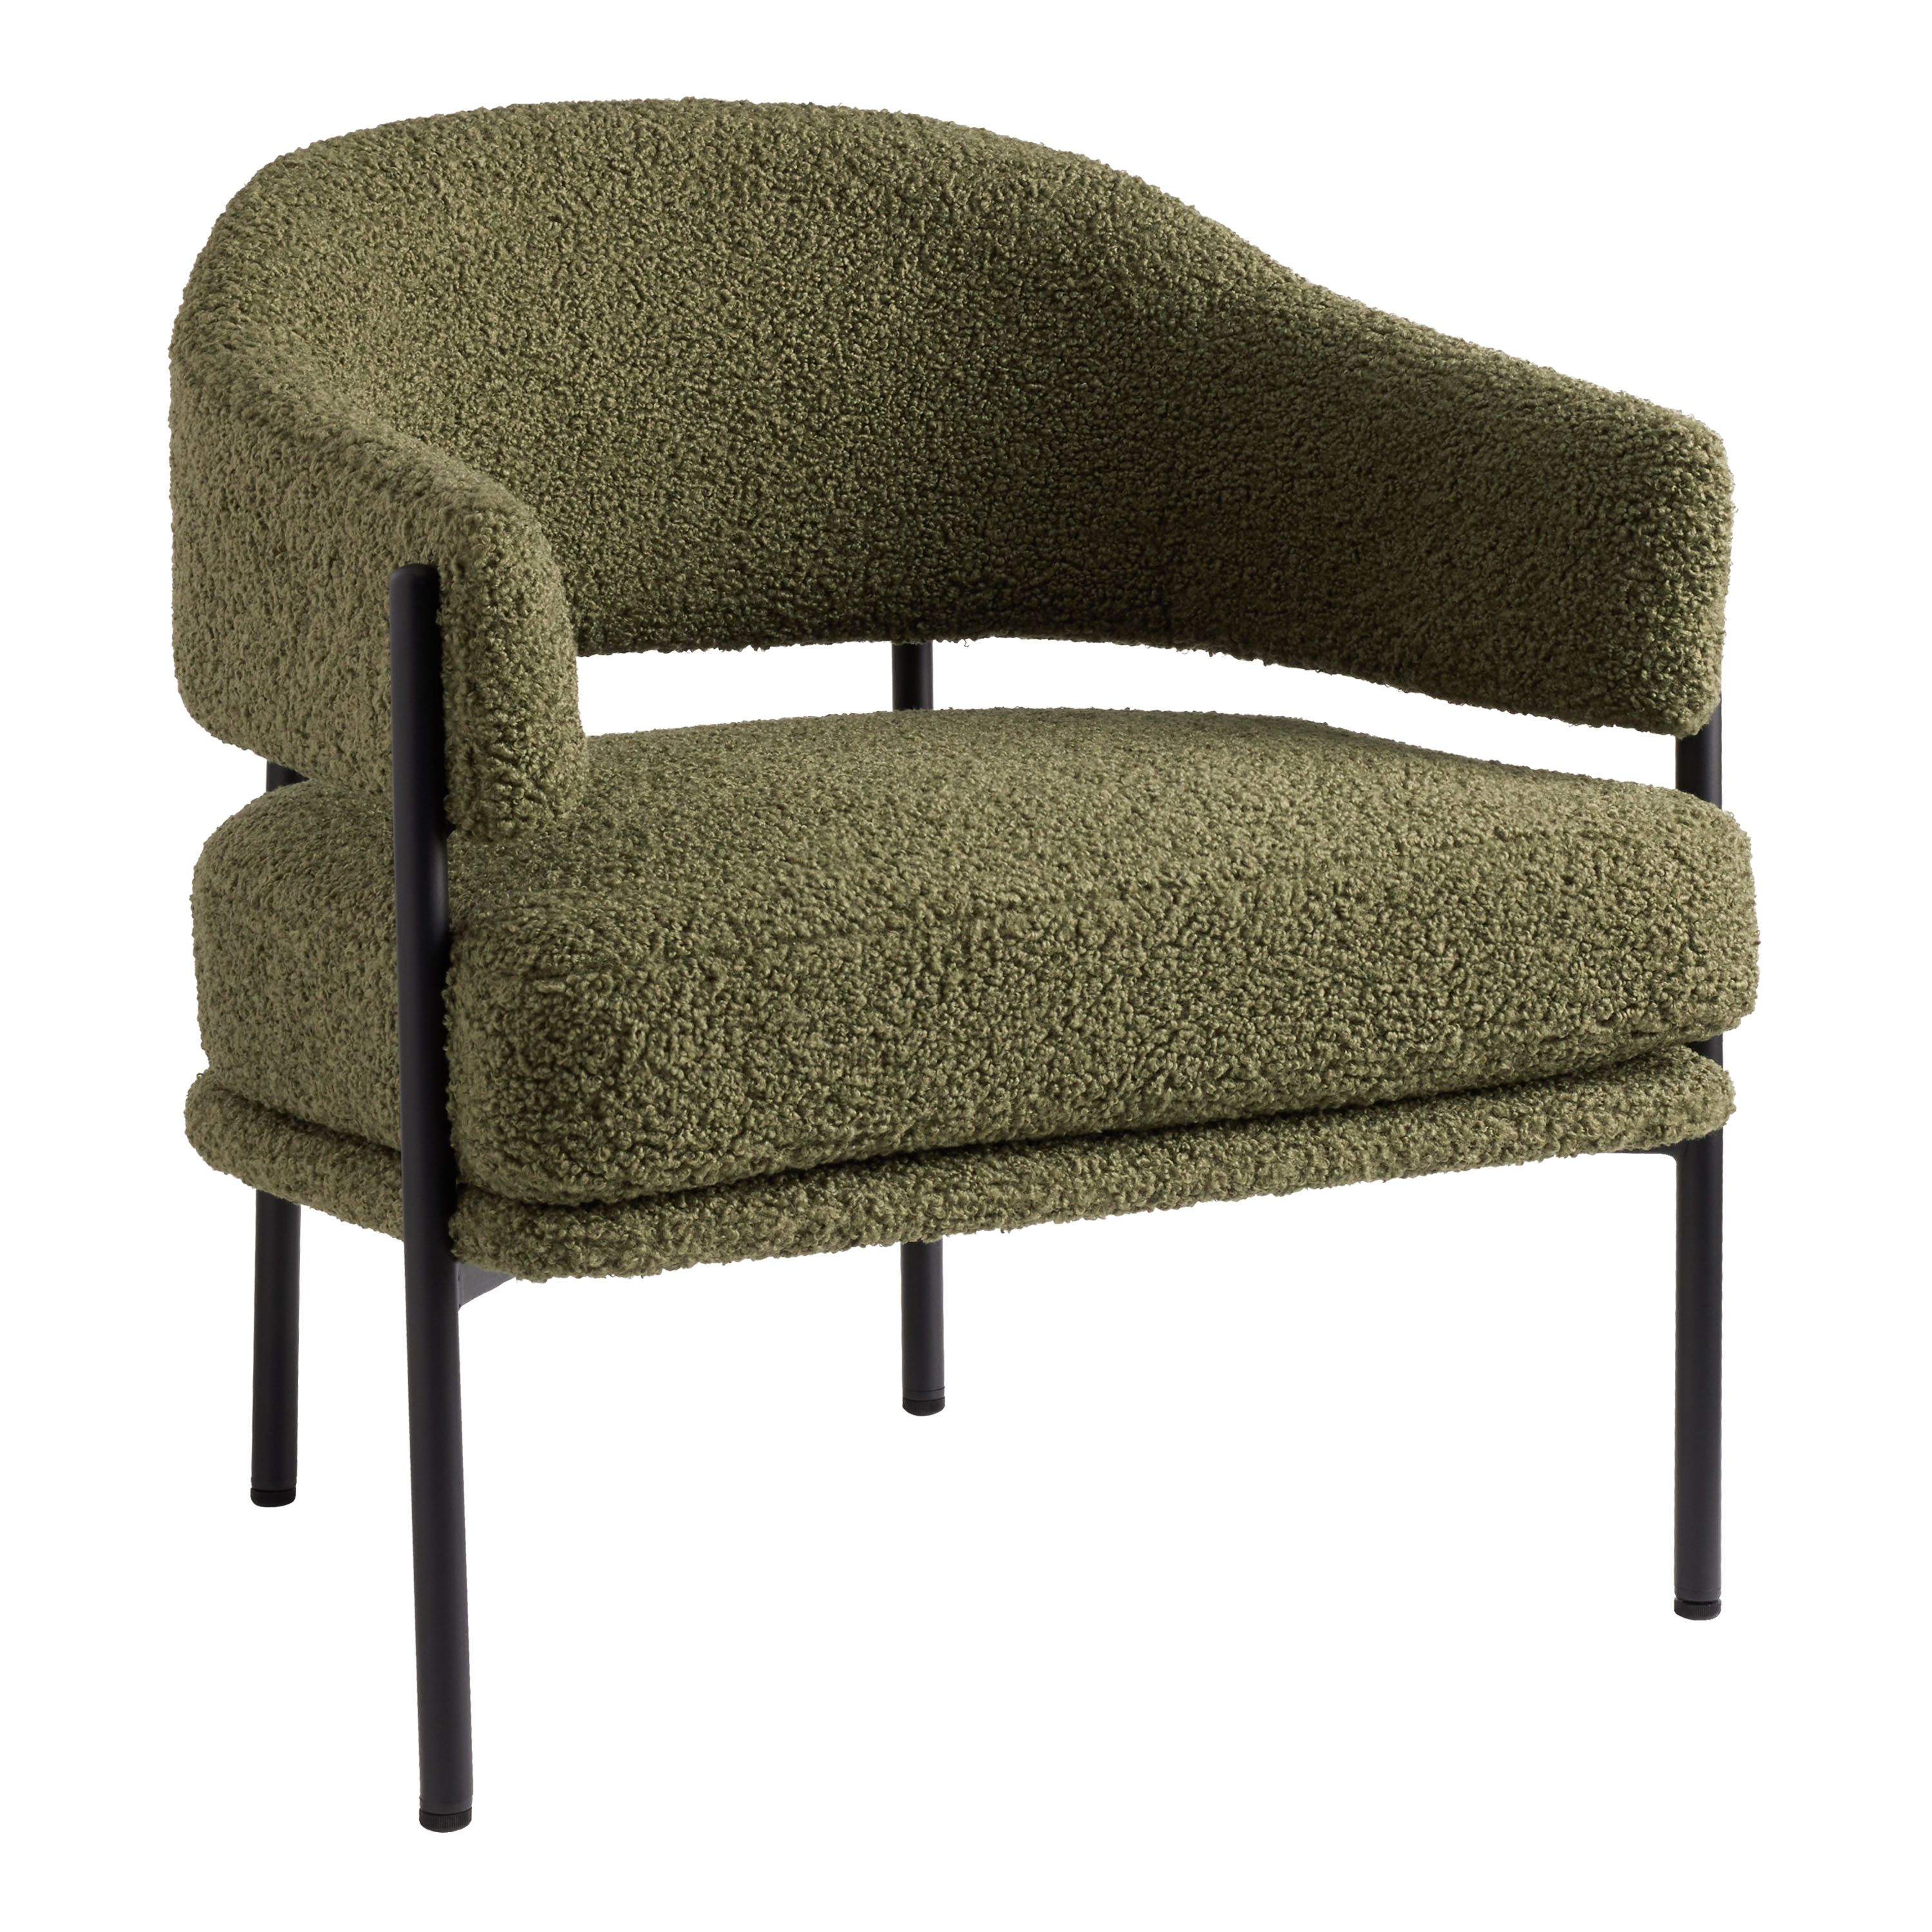 Rylan Moss Green Faux Sherpa Curved Back Chair | World Market